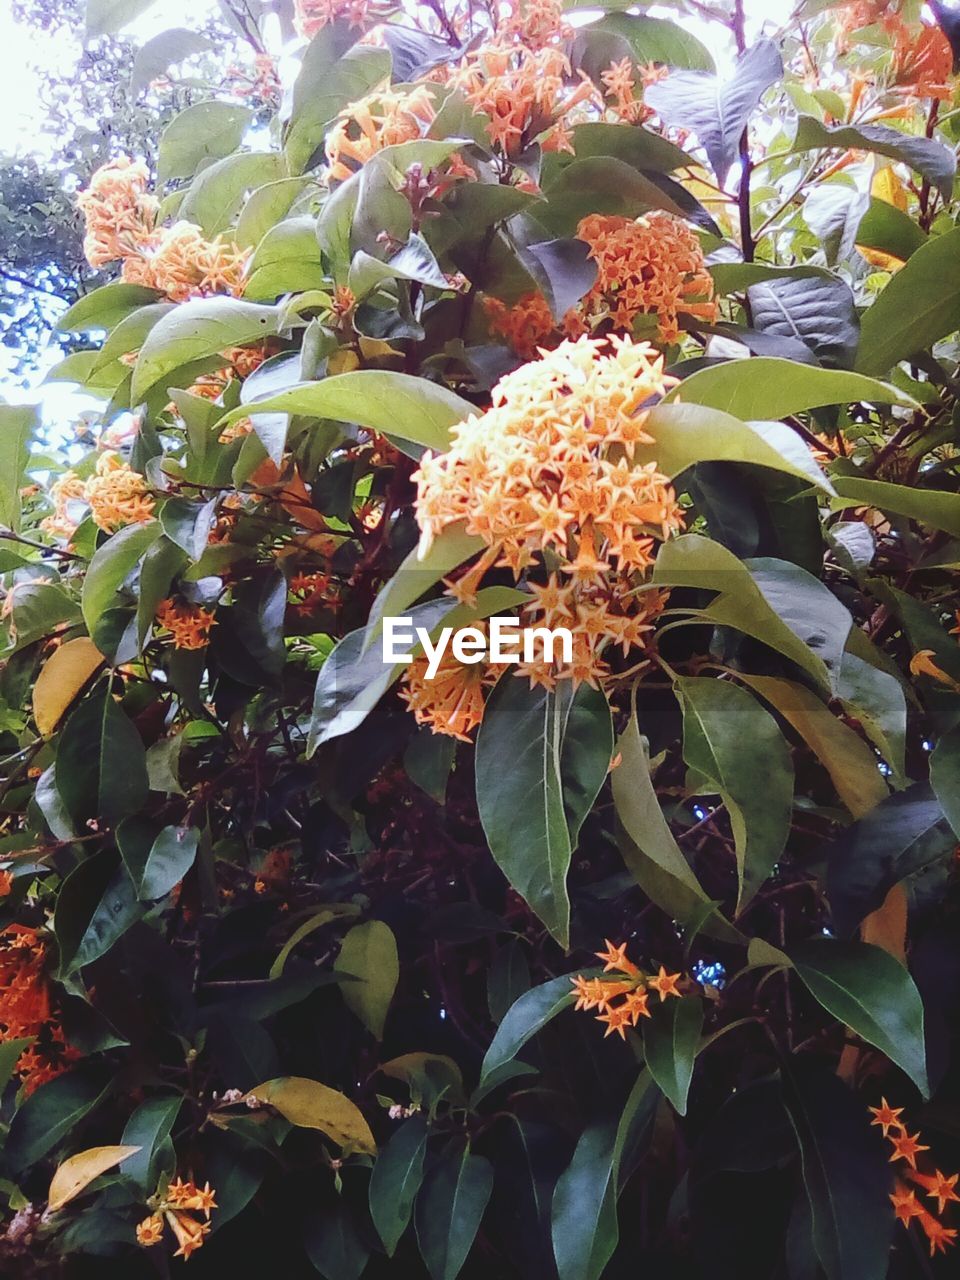 CLOSE-UP OF FLOWERS ON TREE